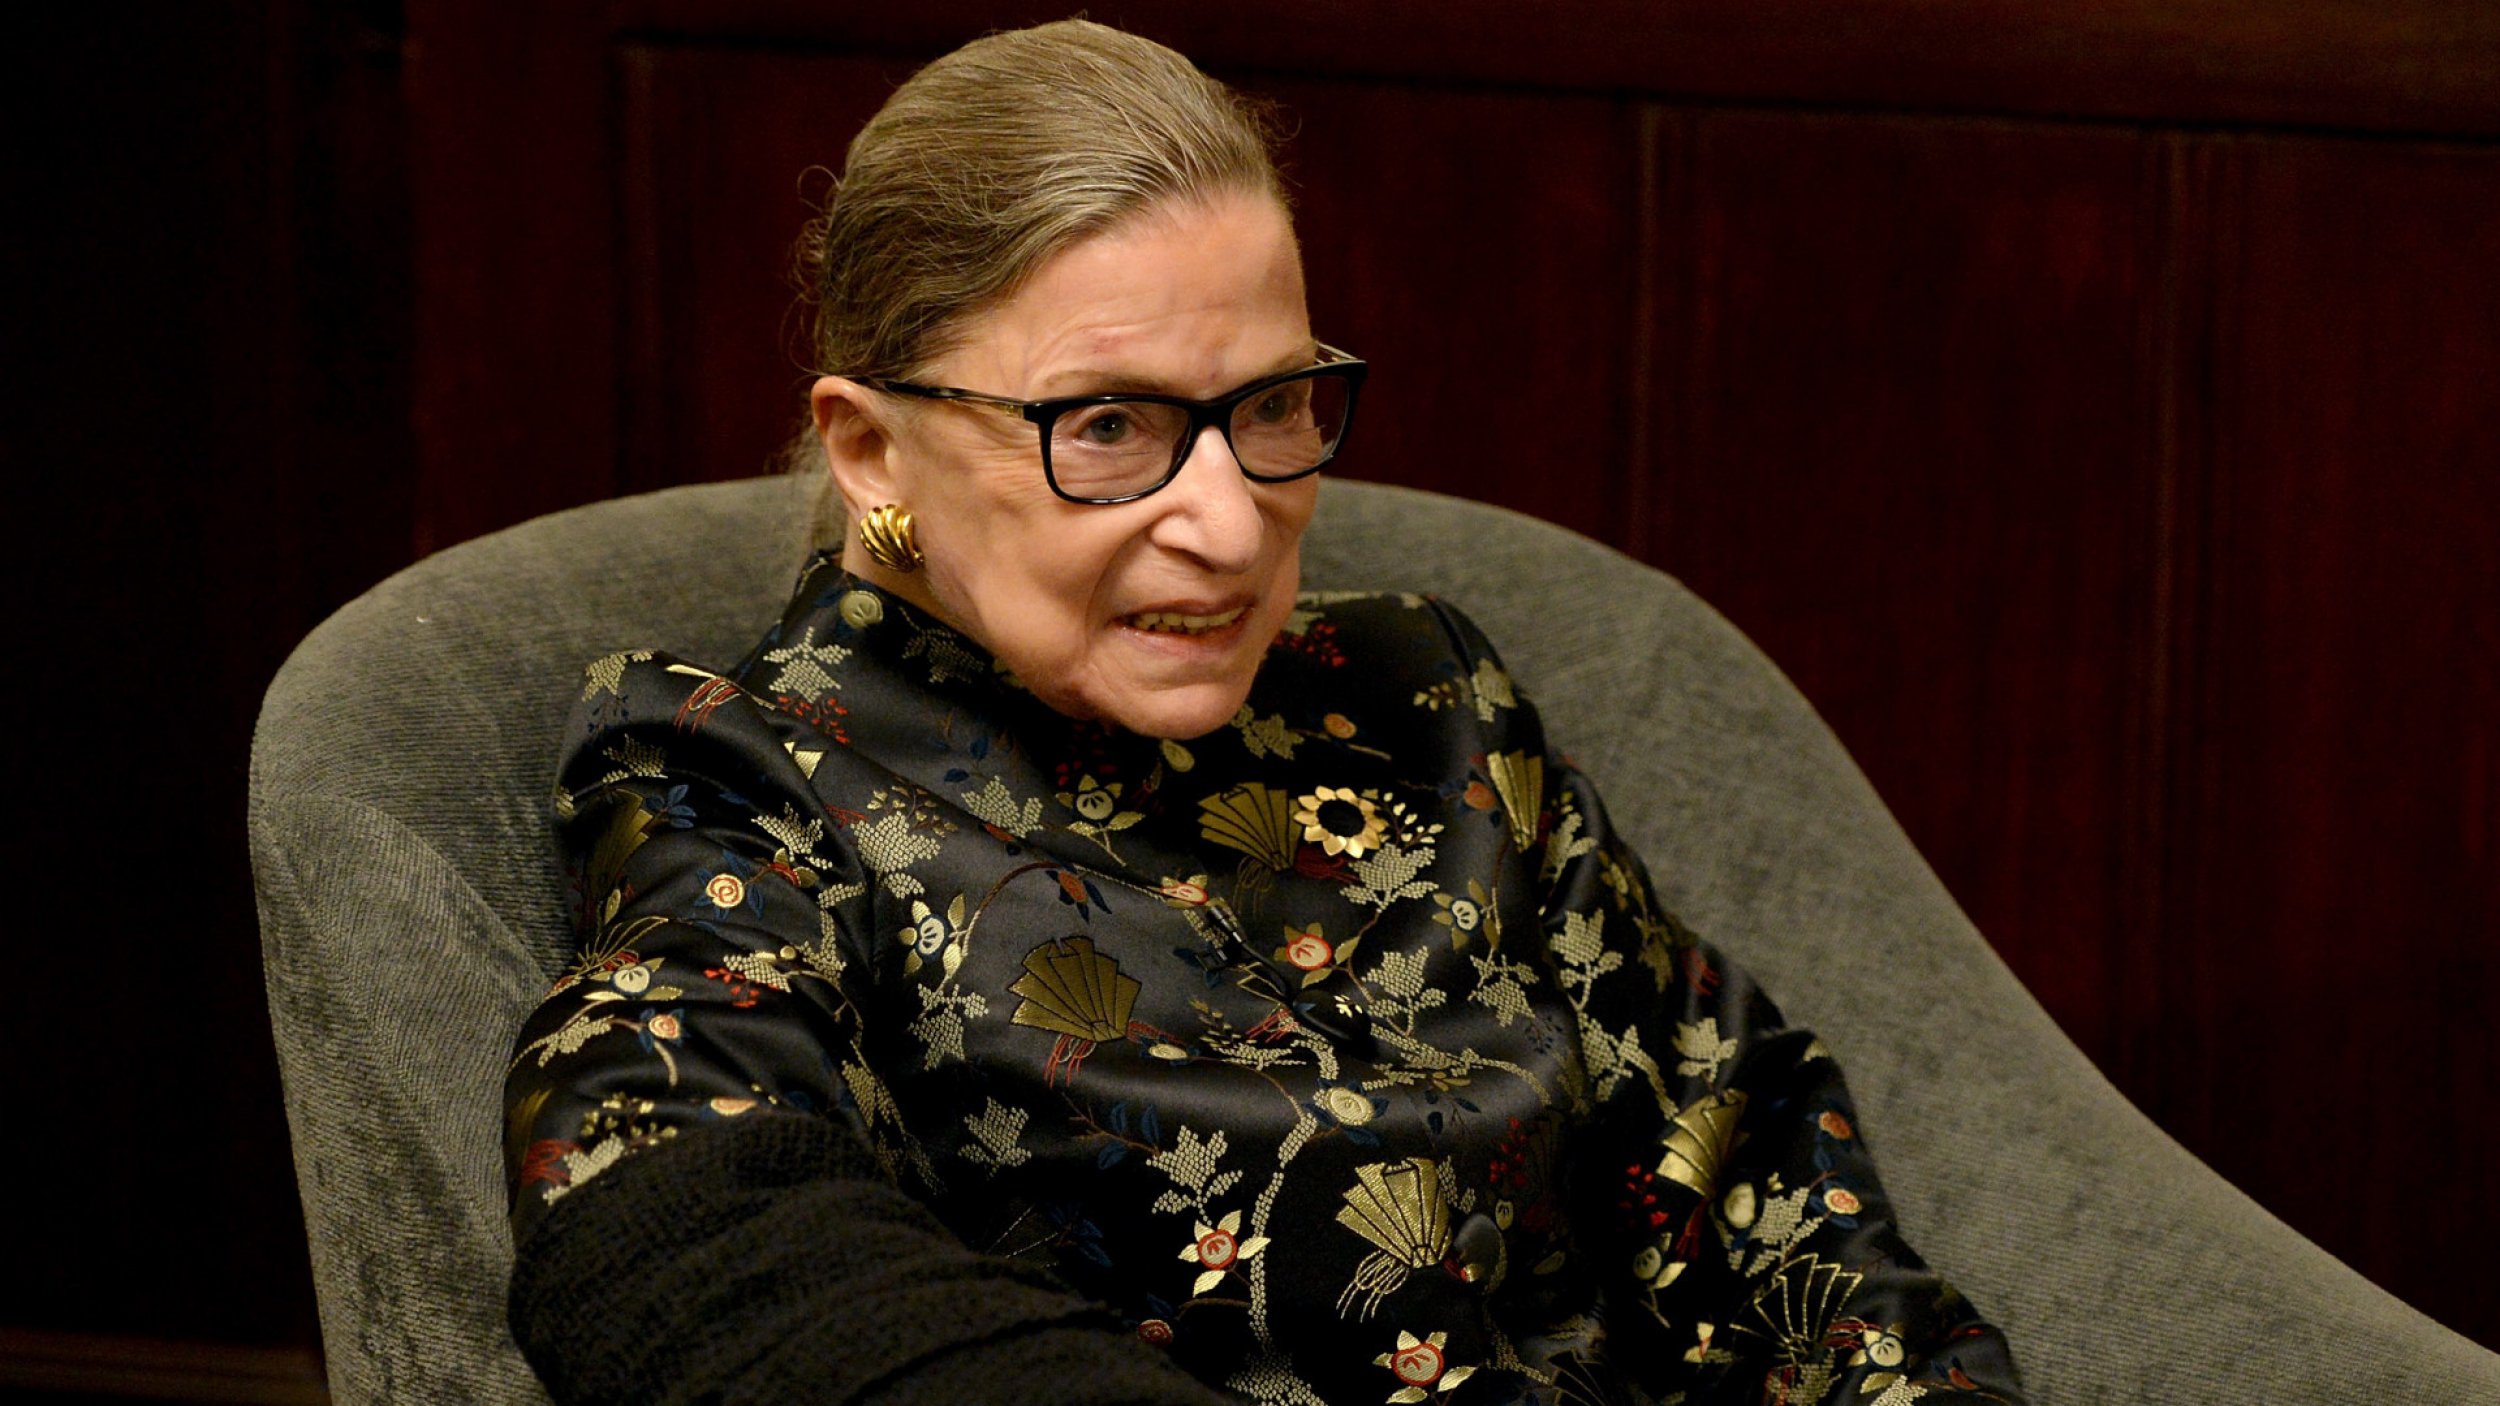 Justice Ruth Bader Ginsburg The Most Powerful Quotes From Notorious RBG Over The Years